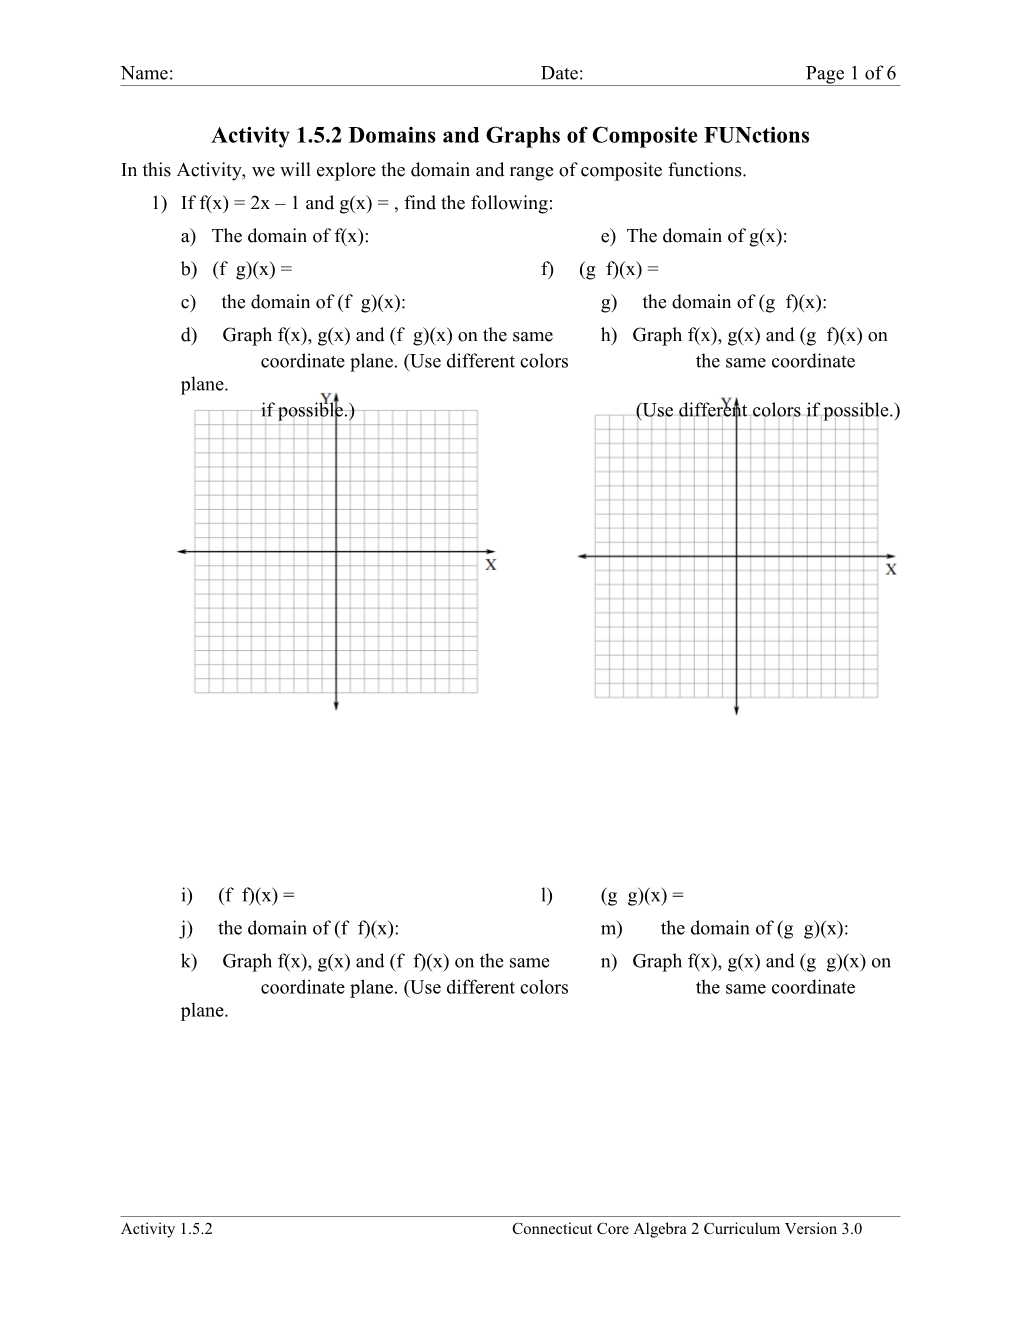 Activity 1.5.2 Dom Ains and Graphs of Composite Functions